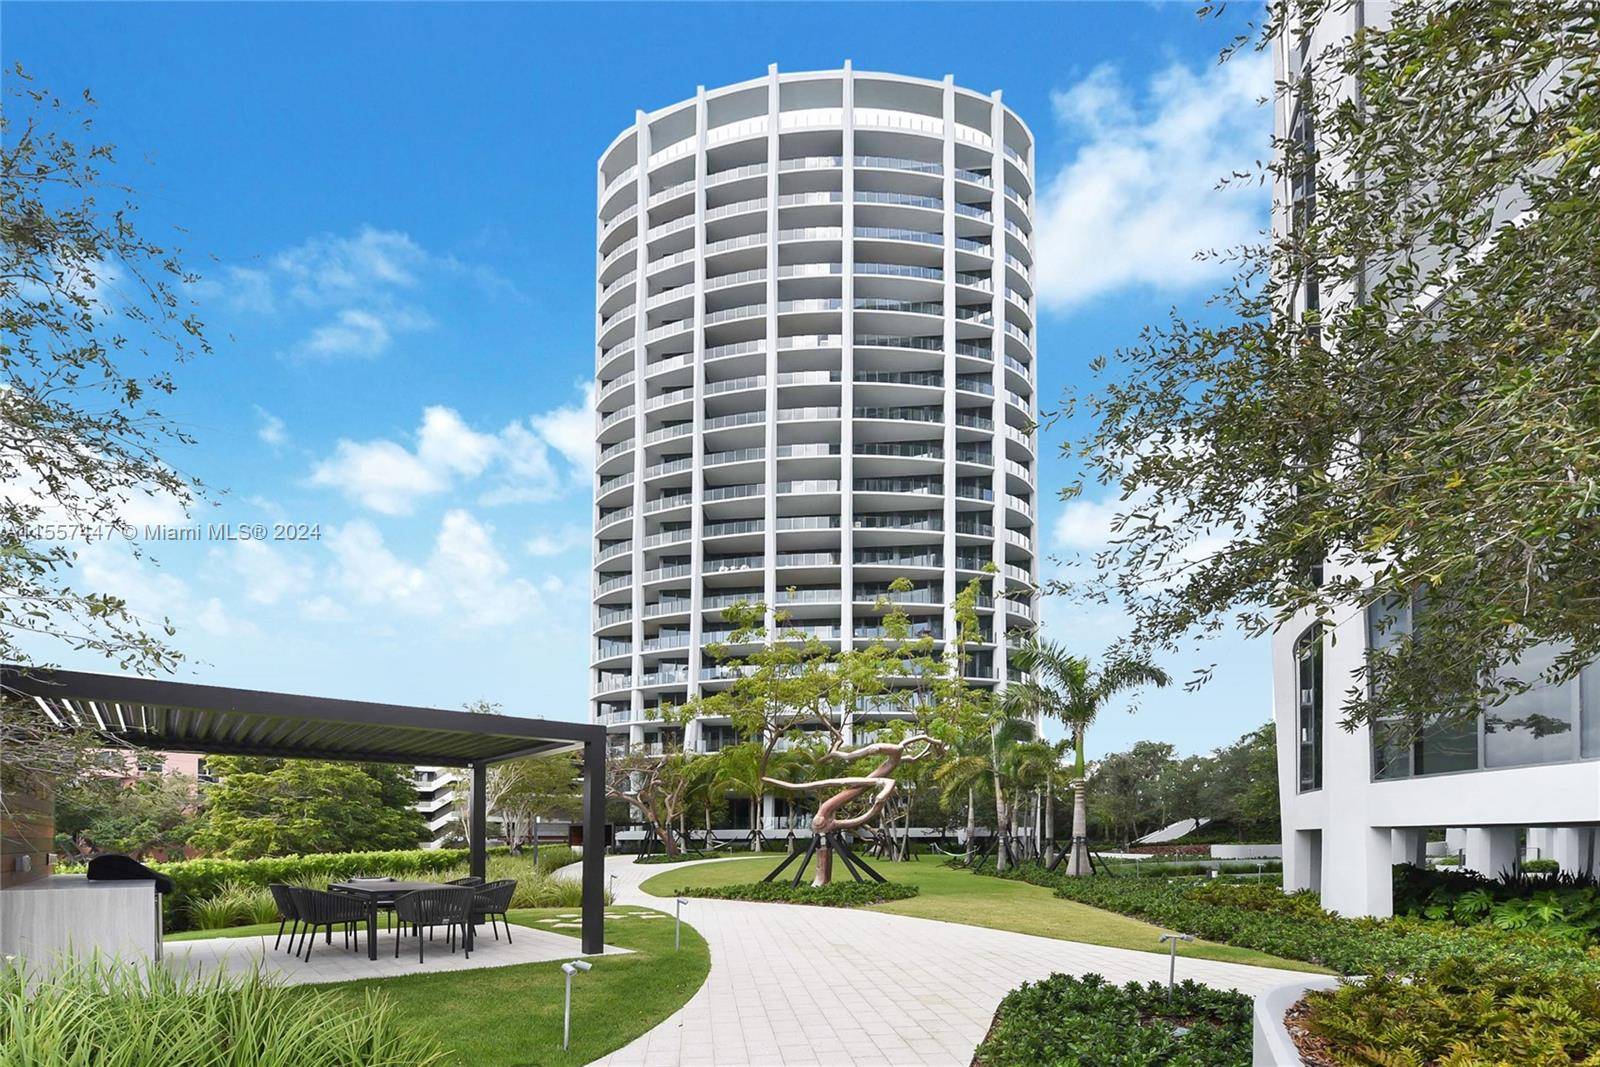 1 Bed Den 1 Bath unit situated in Tower 3 at Park Grove in bayfront Coconut Grove, steps from a variety of shopping, restaurants, parks marinas.